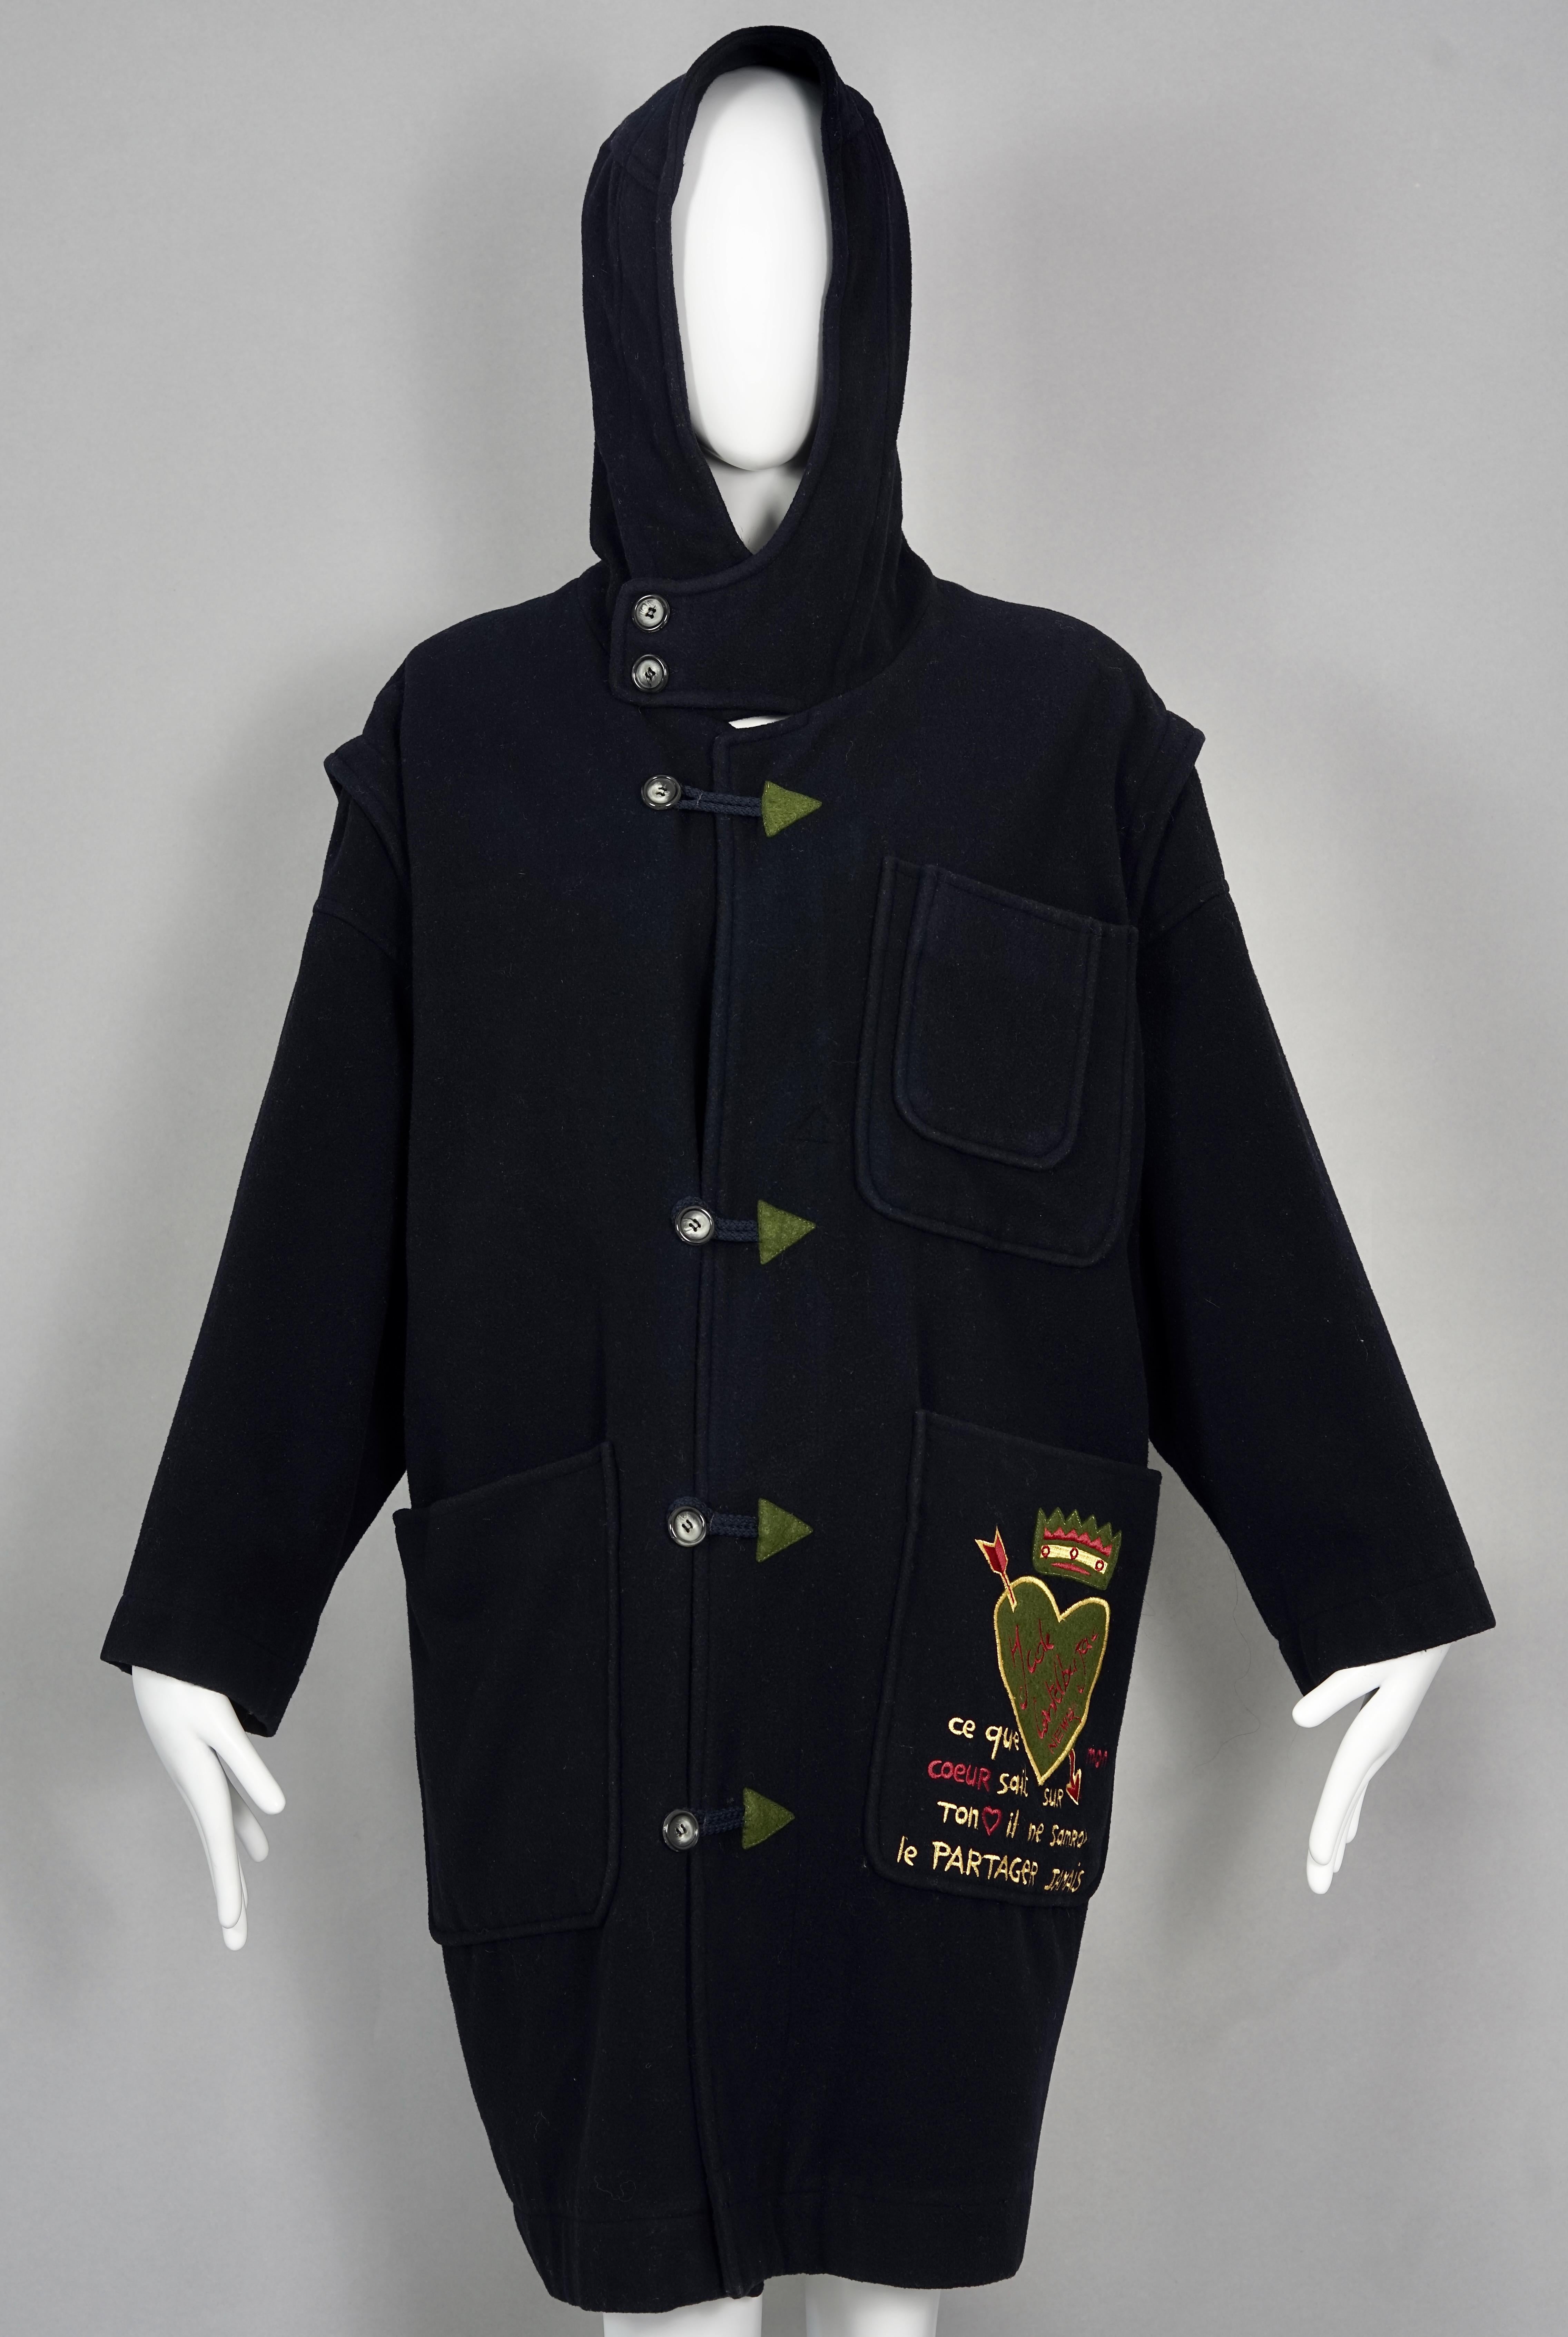 Vintage JEANS CHARLES de CASTELBAJAC Arrows Large Pockets Hooded Duffle Coat

Measurements taken laid flat, please double bust, waist and hips:
Shoulder: 21.25 inches (54 cm)
Sleeves: 20.47 inches (52 cm)
Bust: 25.59 inches (65 cm)
Waist: 25.59